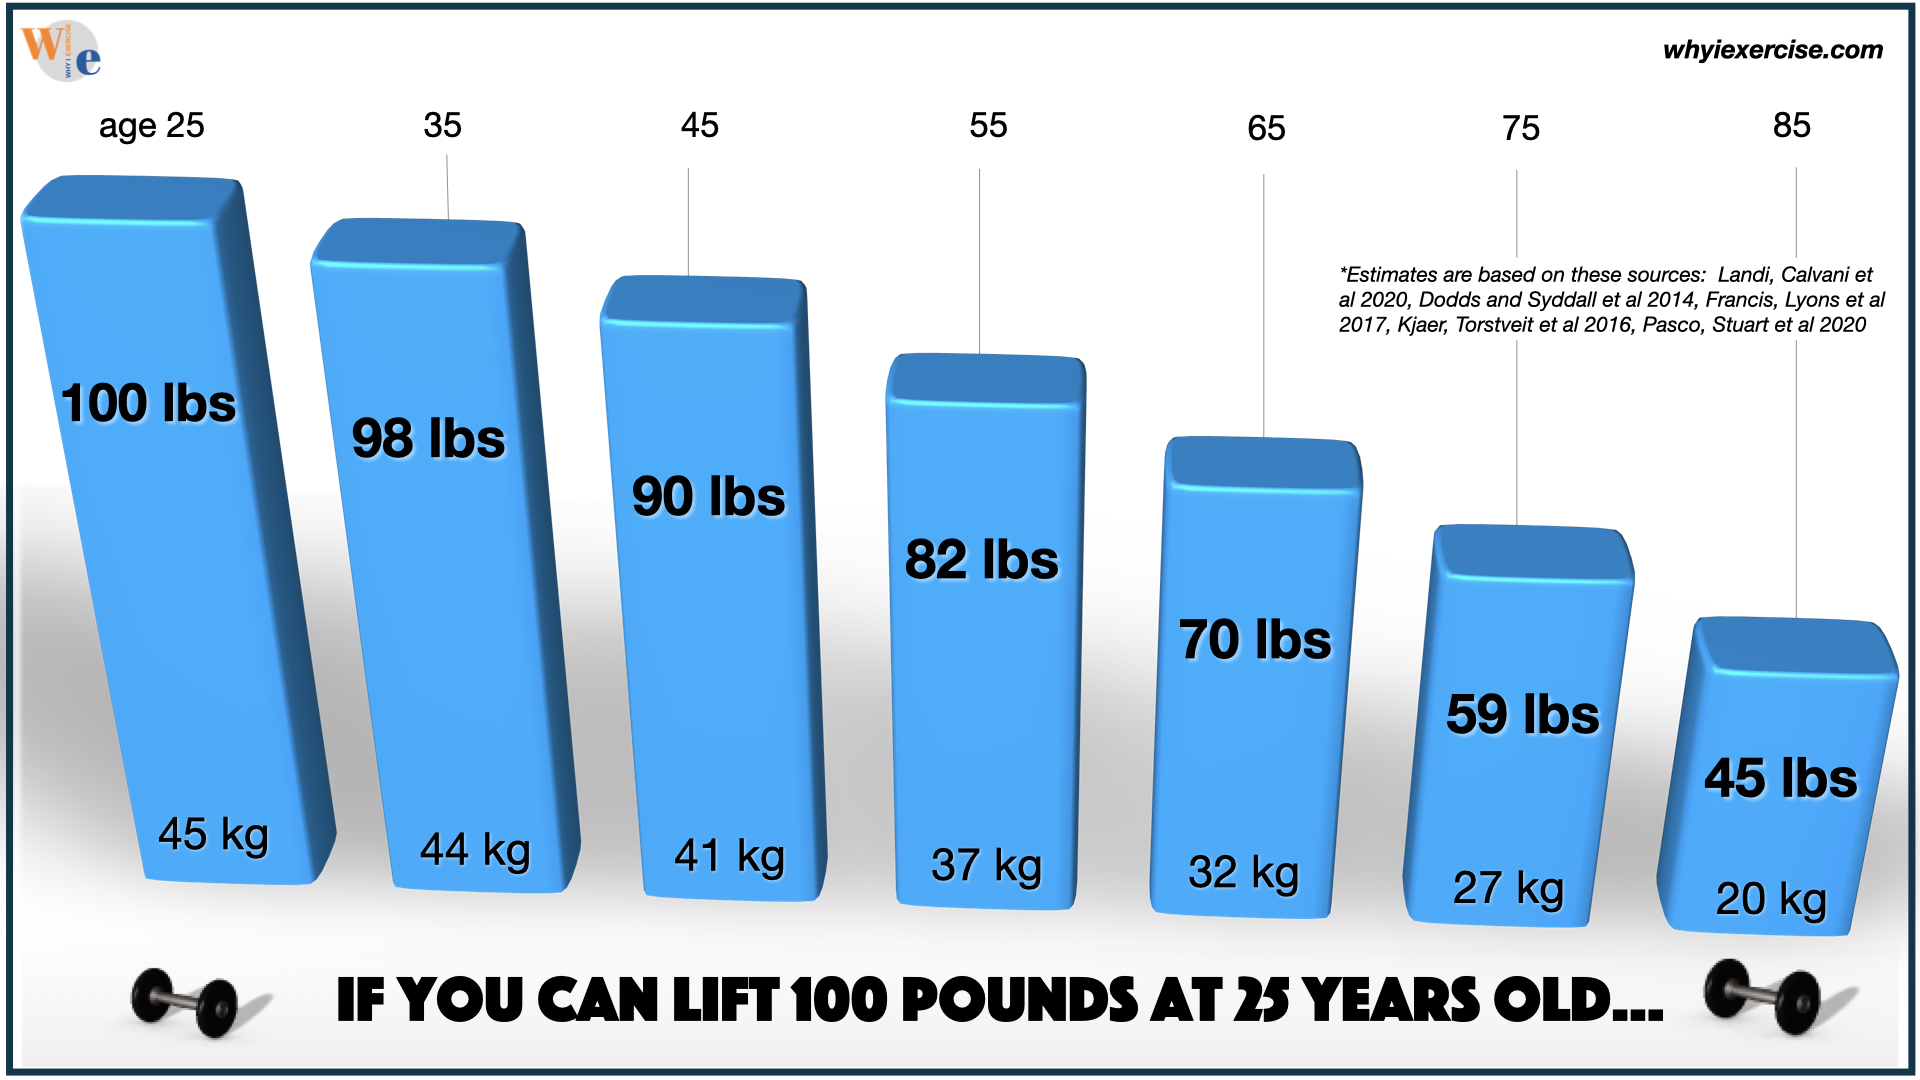 strength decline estimate from age 25 to 85